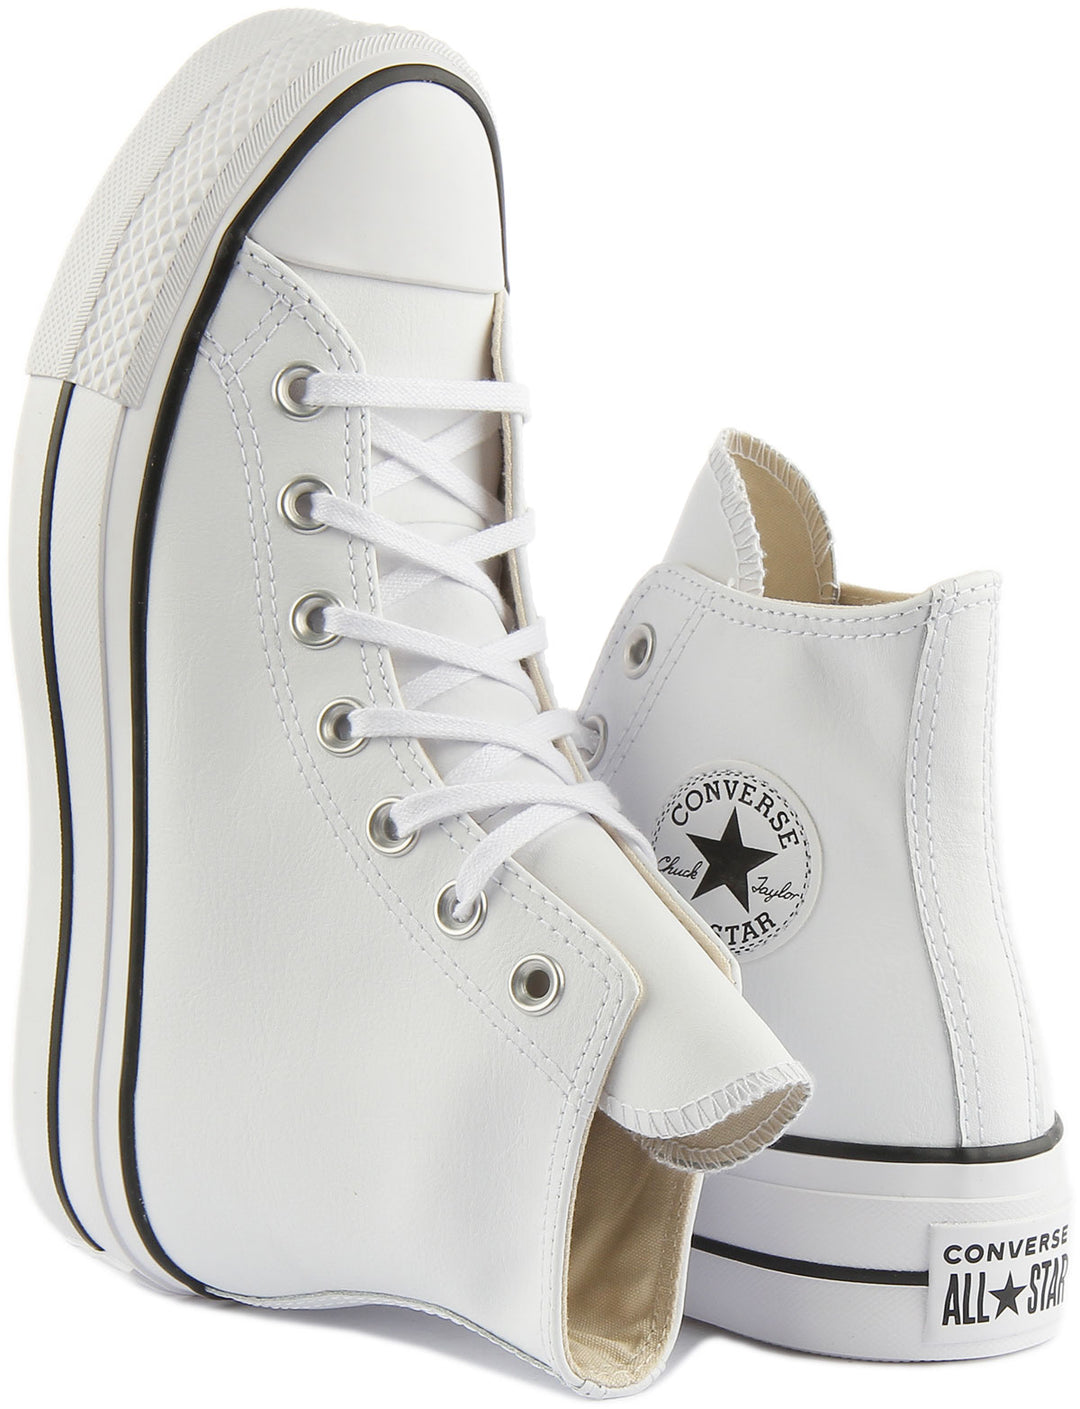 Converse All Star Lift 561676 In White Leather